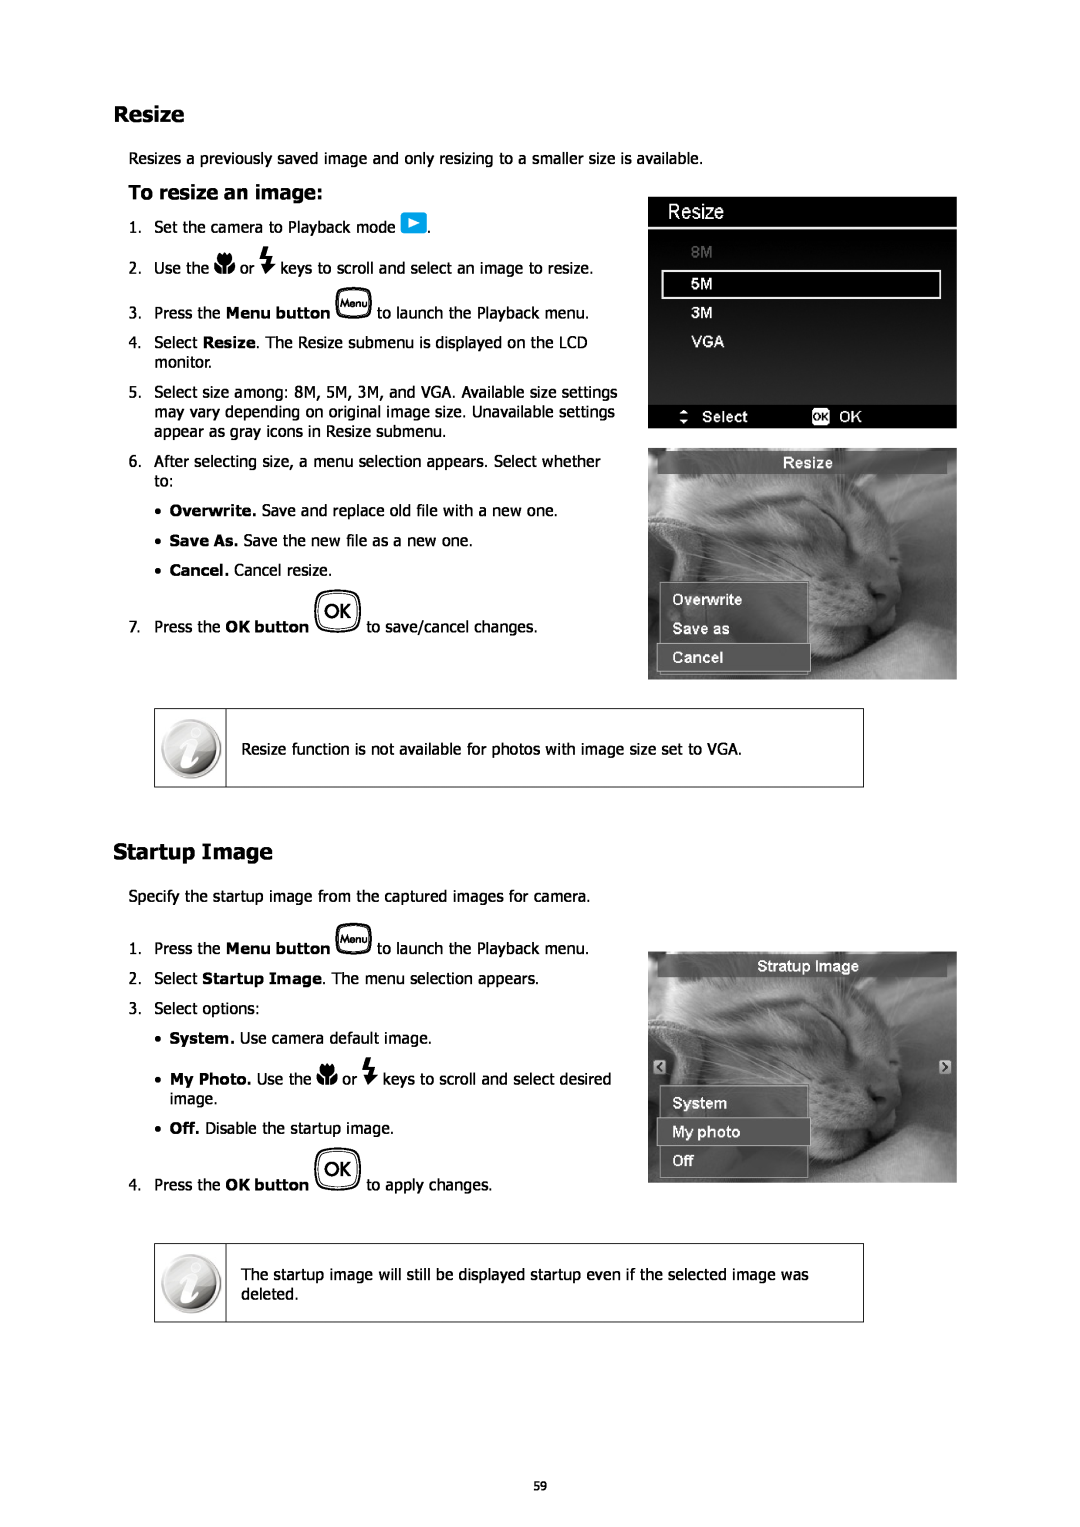 HP SW450 manual Resize, Startup Image, To resize an image 